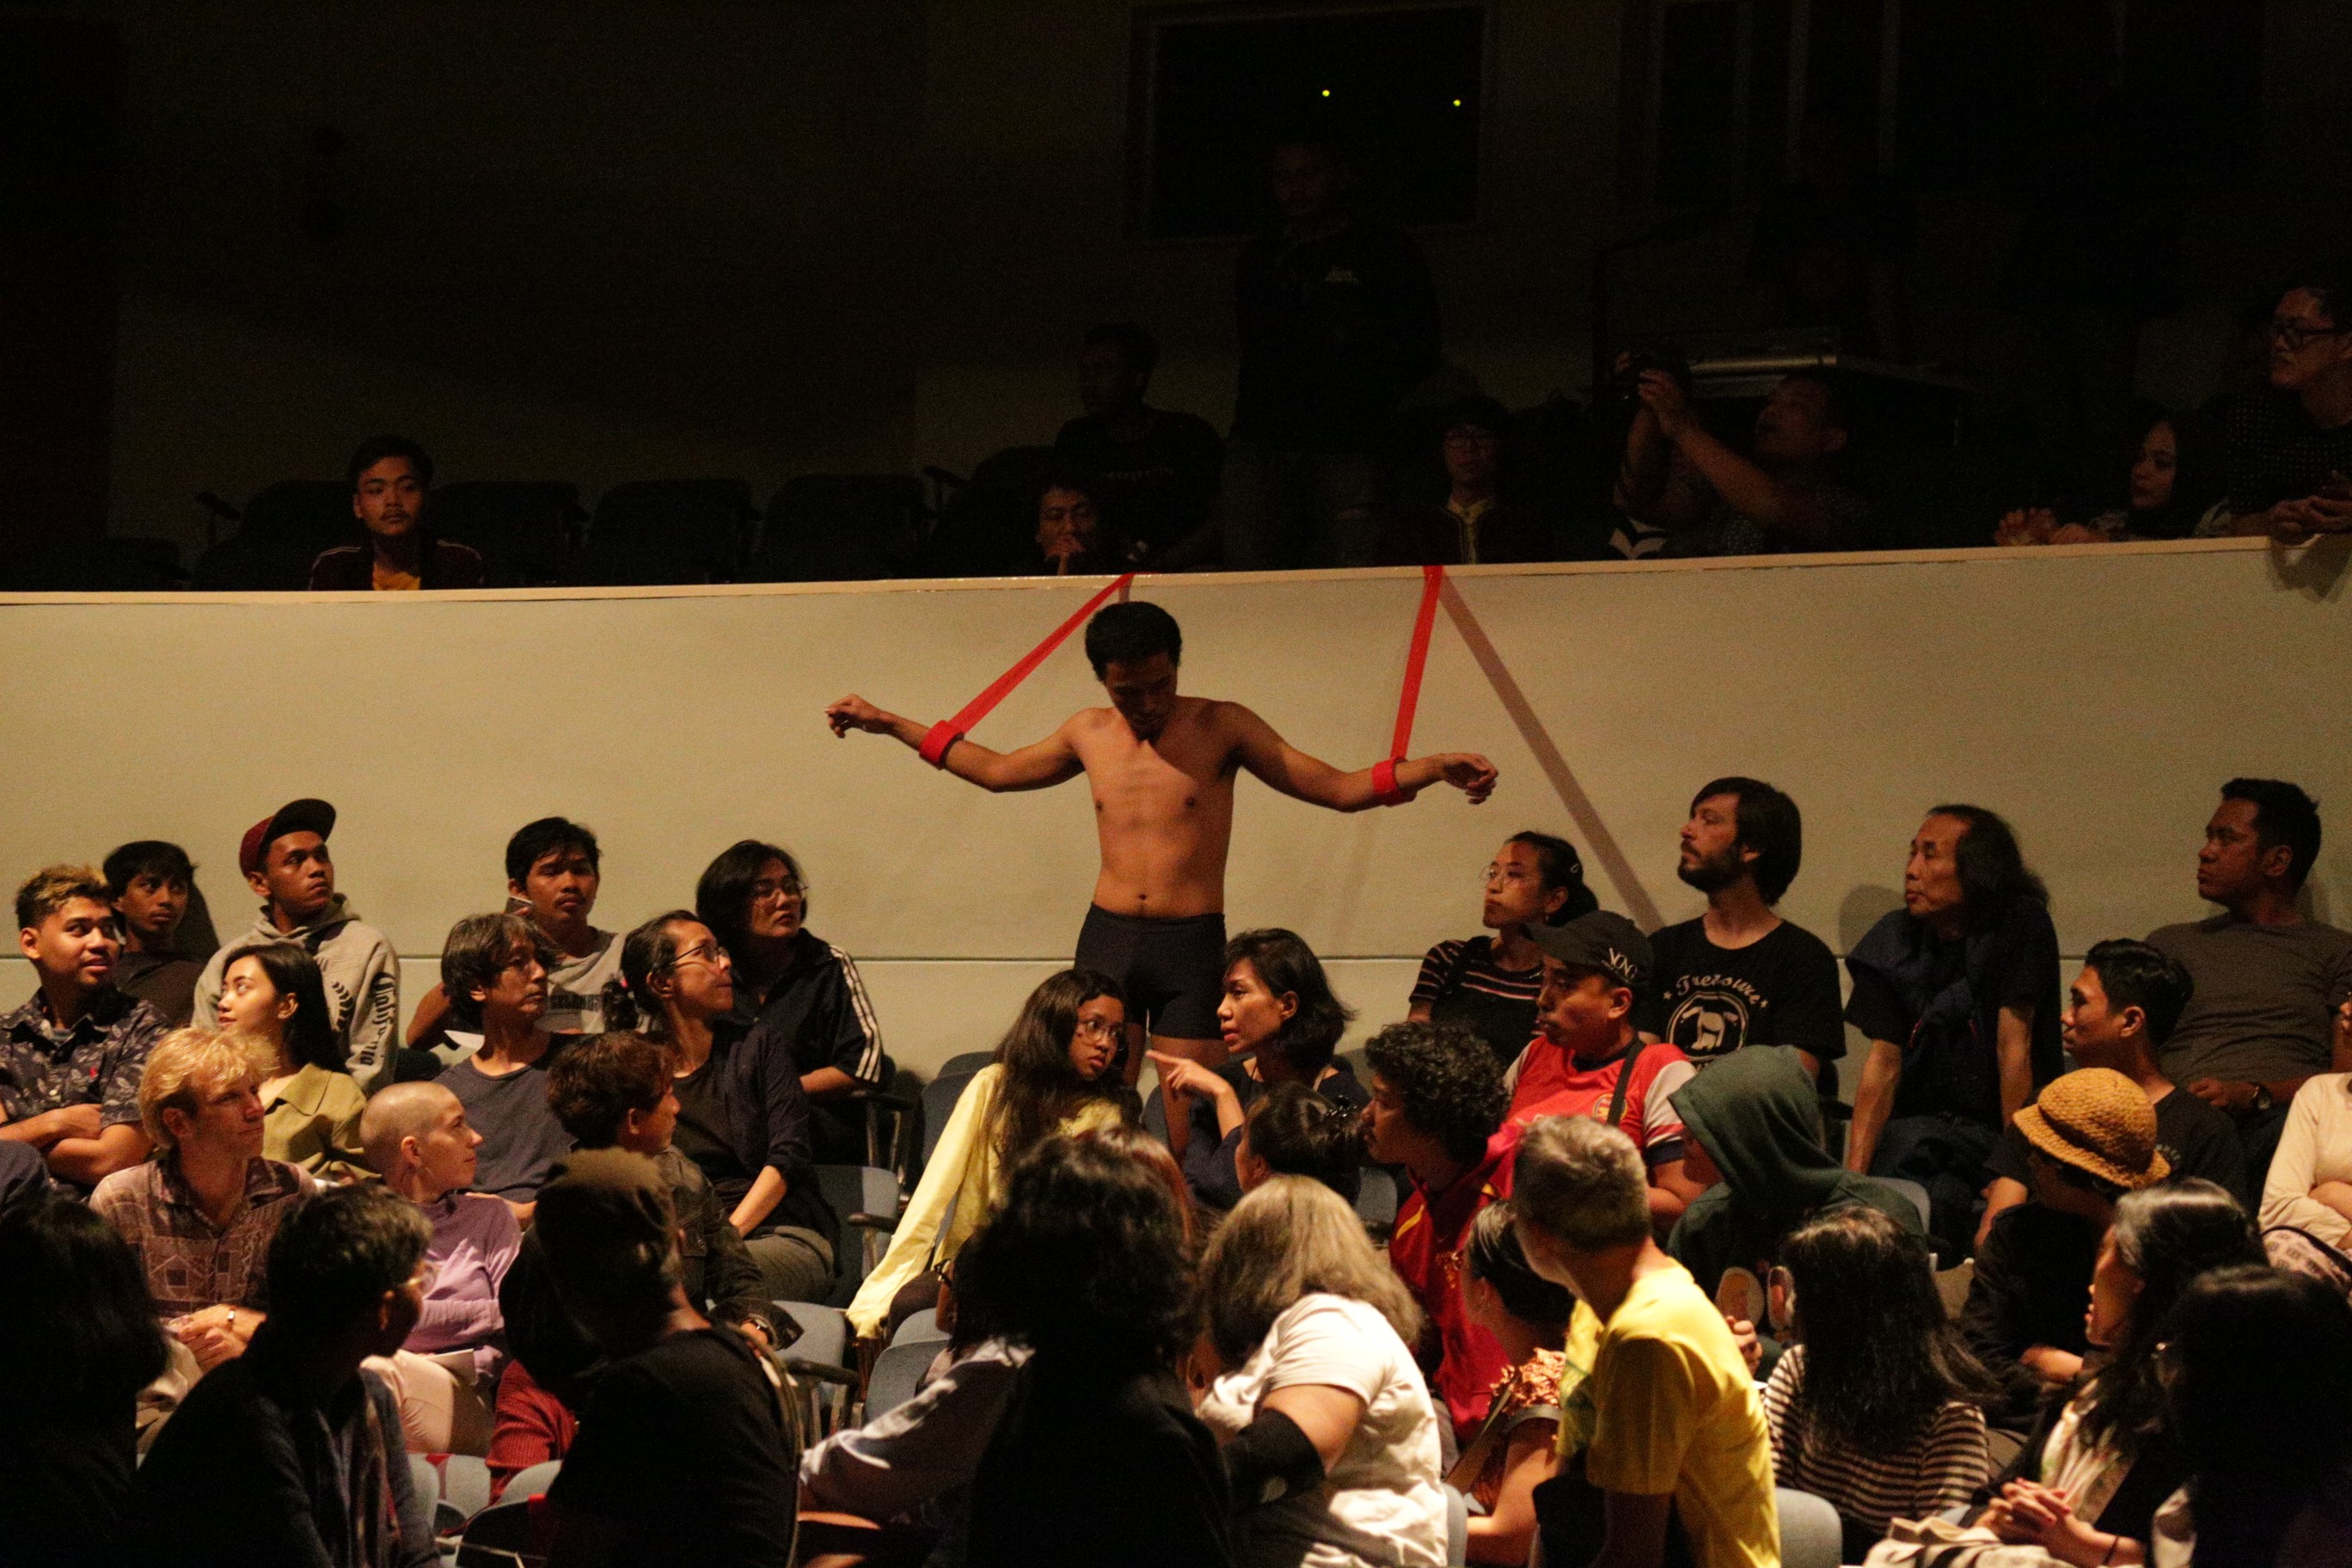 69 Performance Club member Dhanurendra Pandji performing a work titled “Lines Formation No.1” in Jakarta, Indonesia. Photo: 69 Performance Club